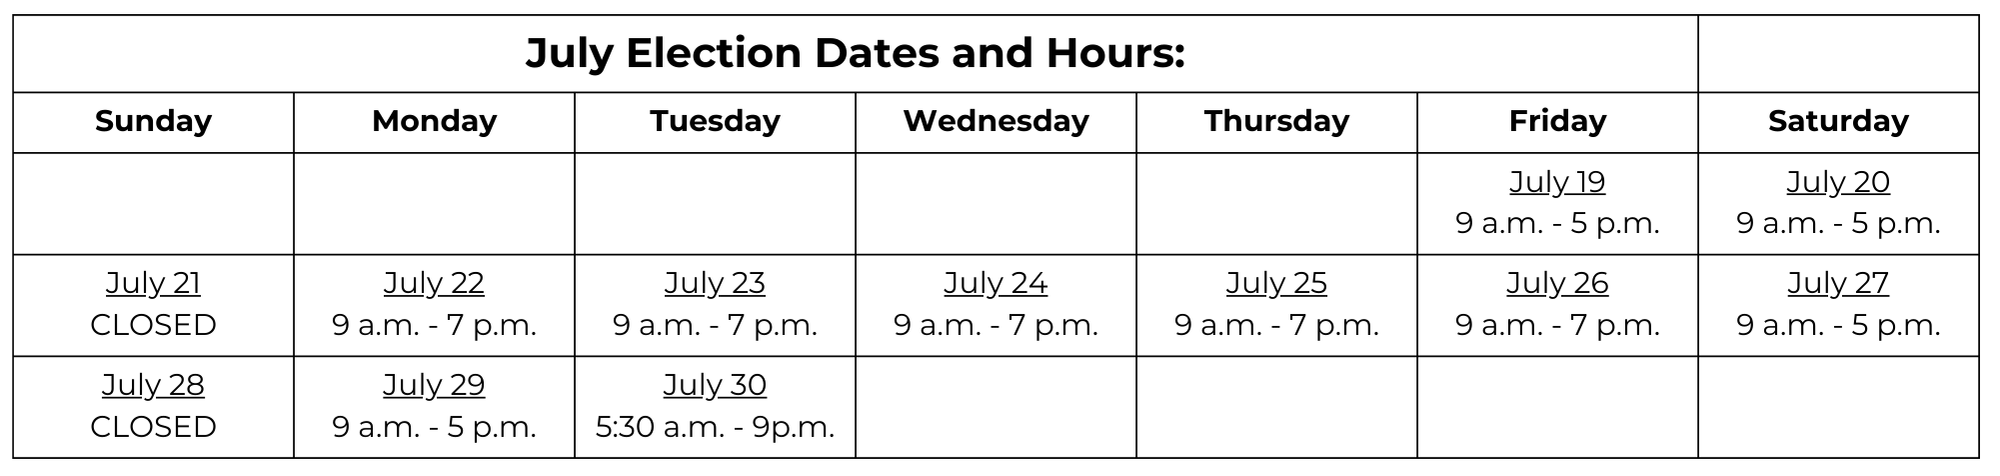 Picture of July Election Polling Location Dates and Hours